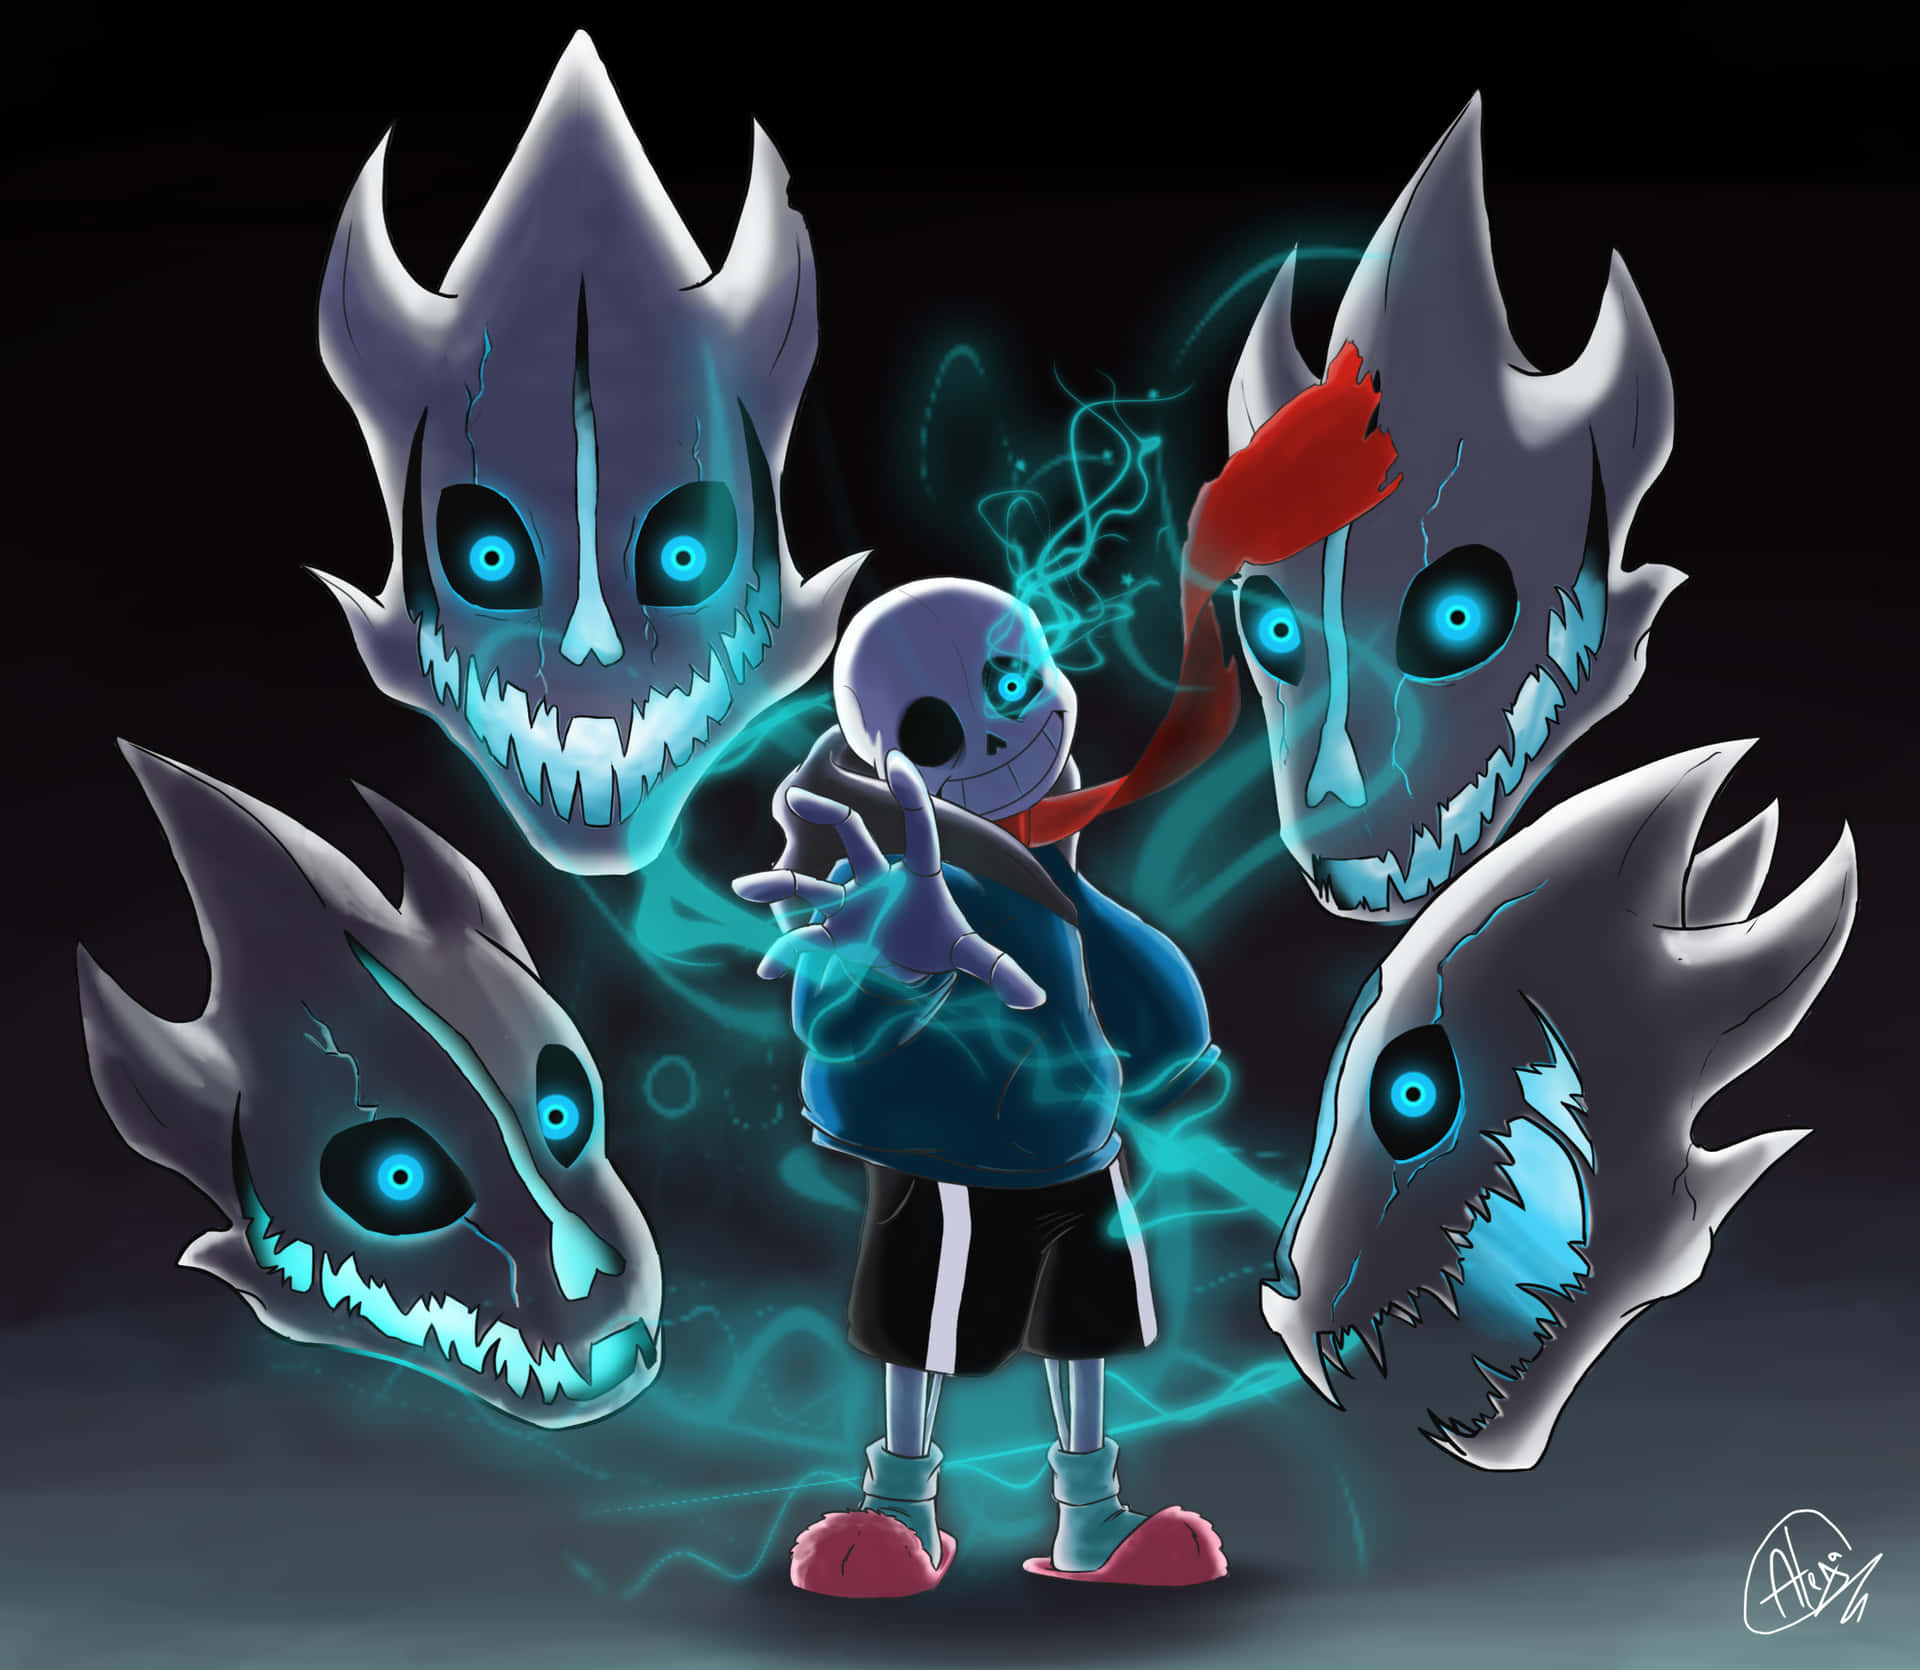 "Get ready to fight the final battle in Undertale with Sans!" Wallpaper